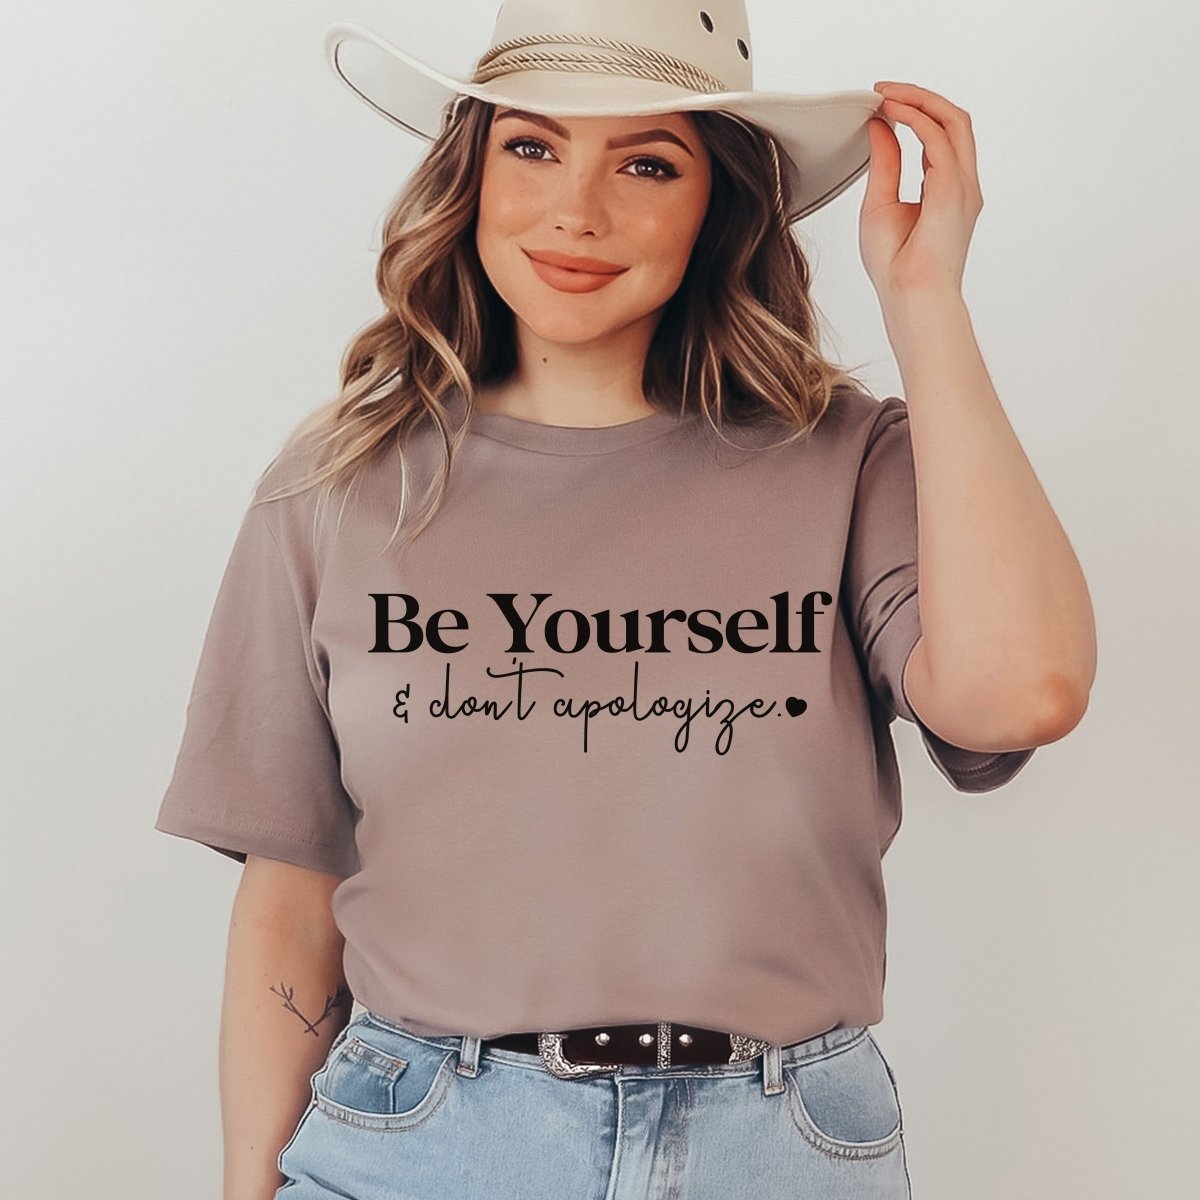 Be yourself Don't apologize Tee - Limeberry Designs